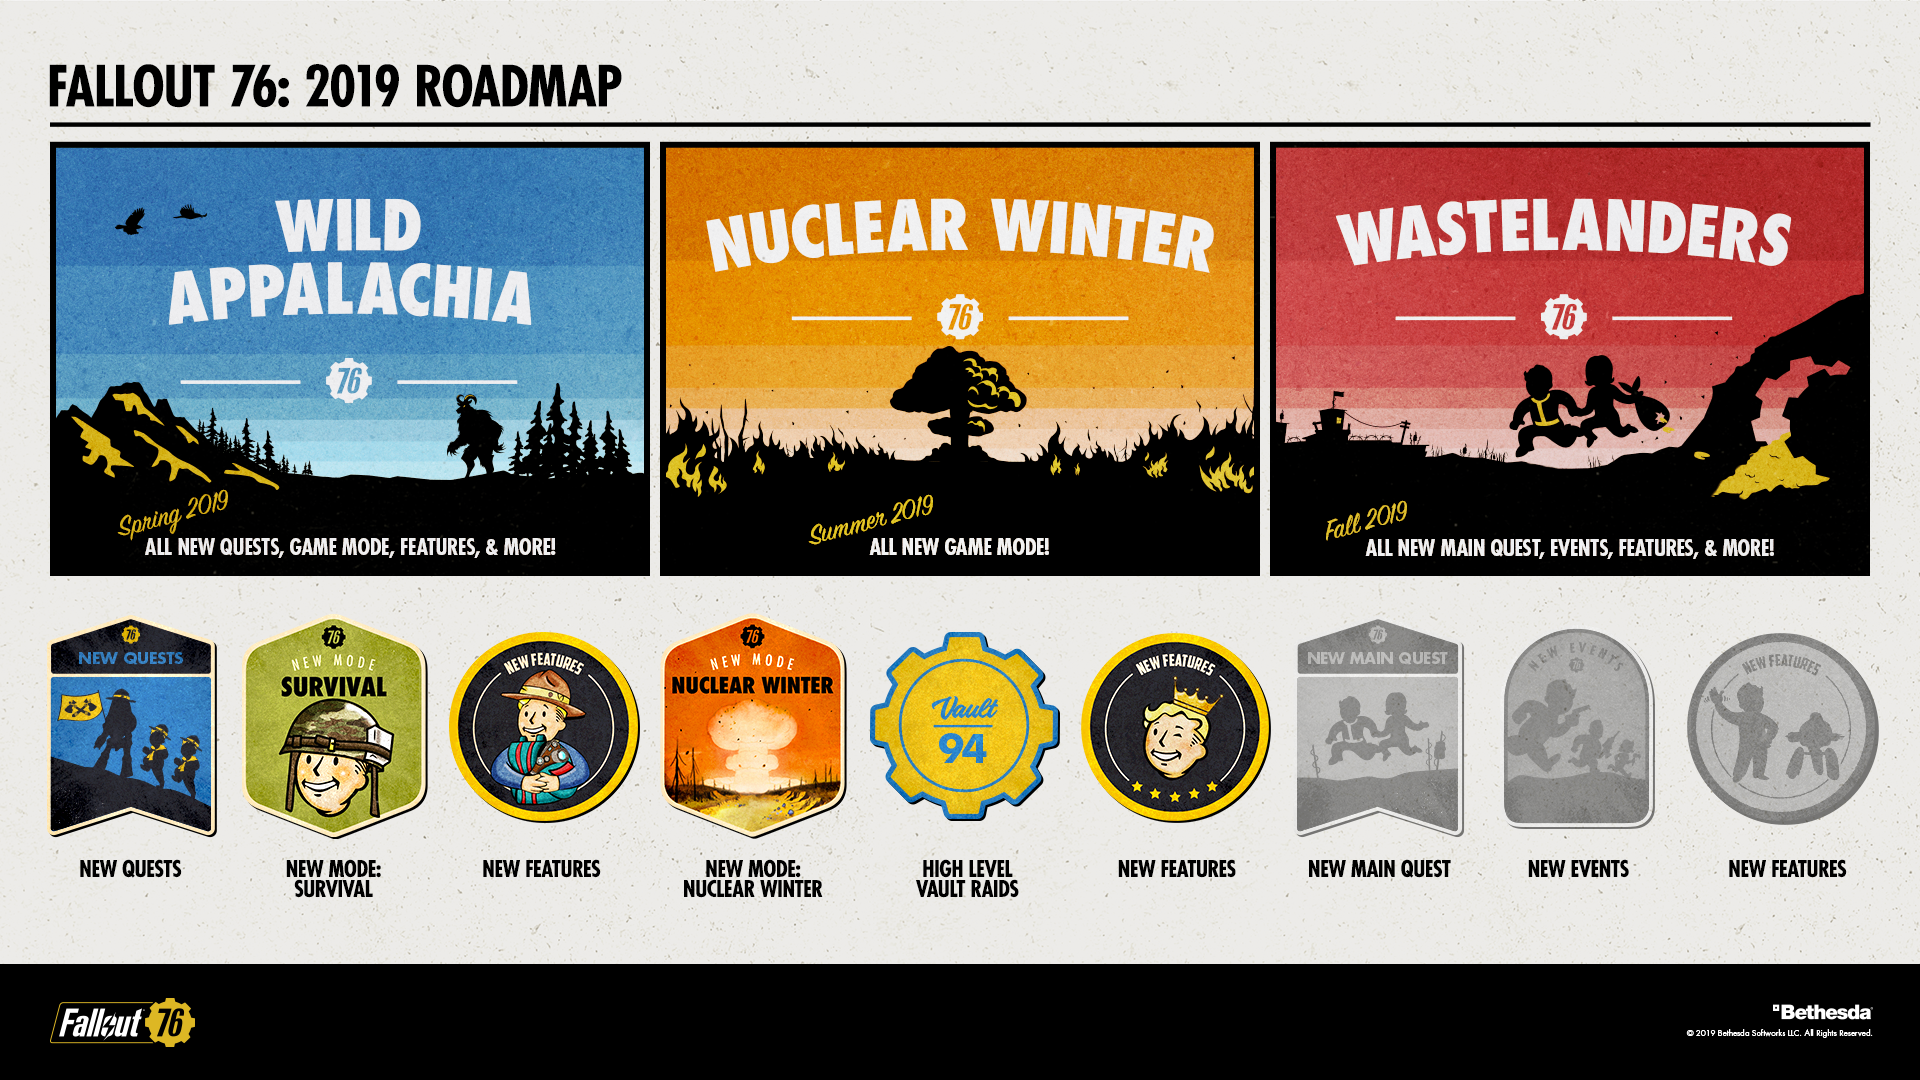 Fallout 76 State of the Game - the 2019 roadmap showing Wild Appalachia update coming in spring, Nuclear Winter in summer, and Wastelanders in fall